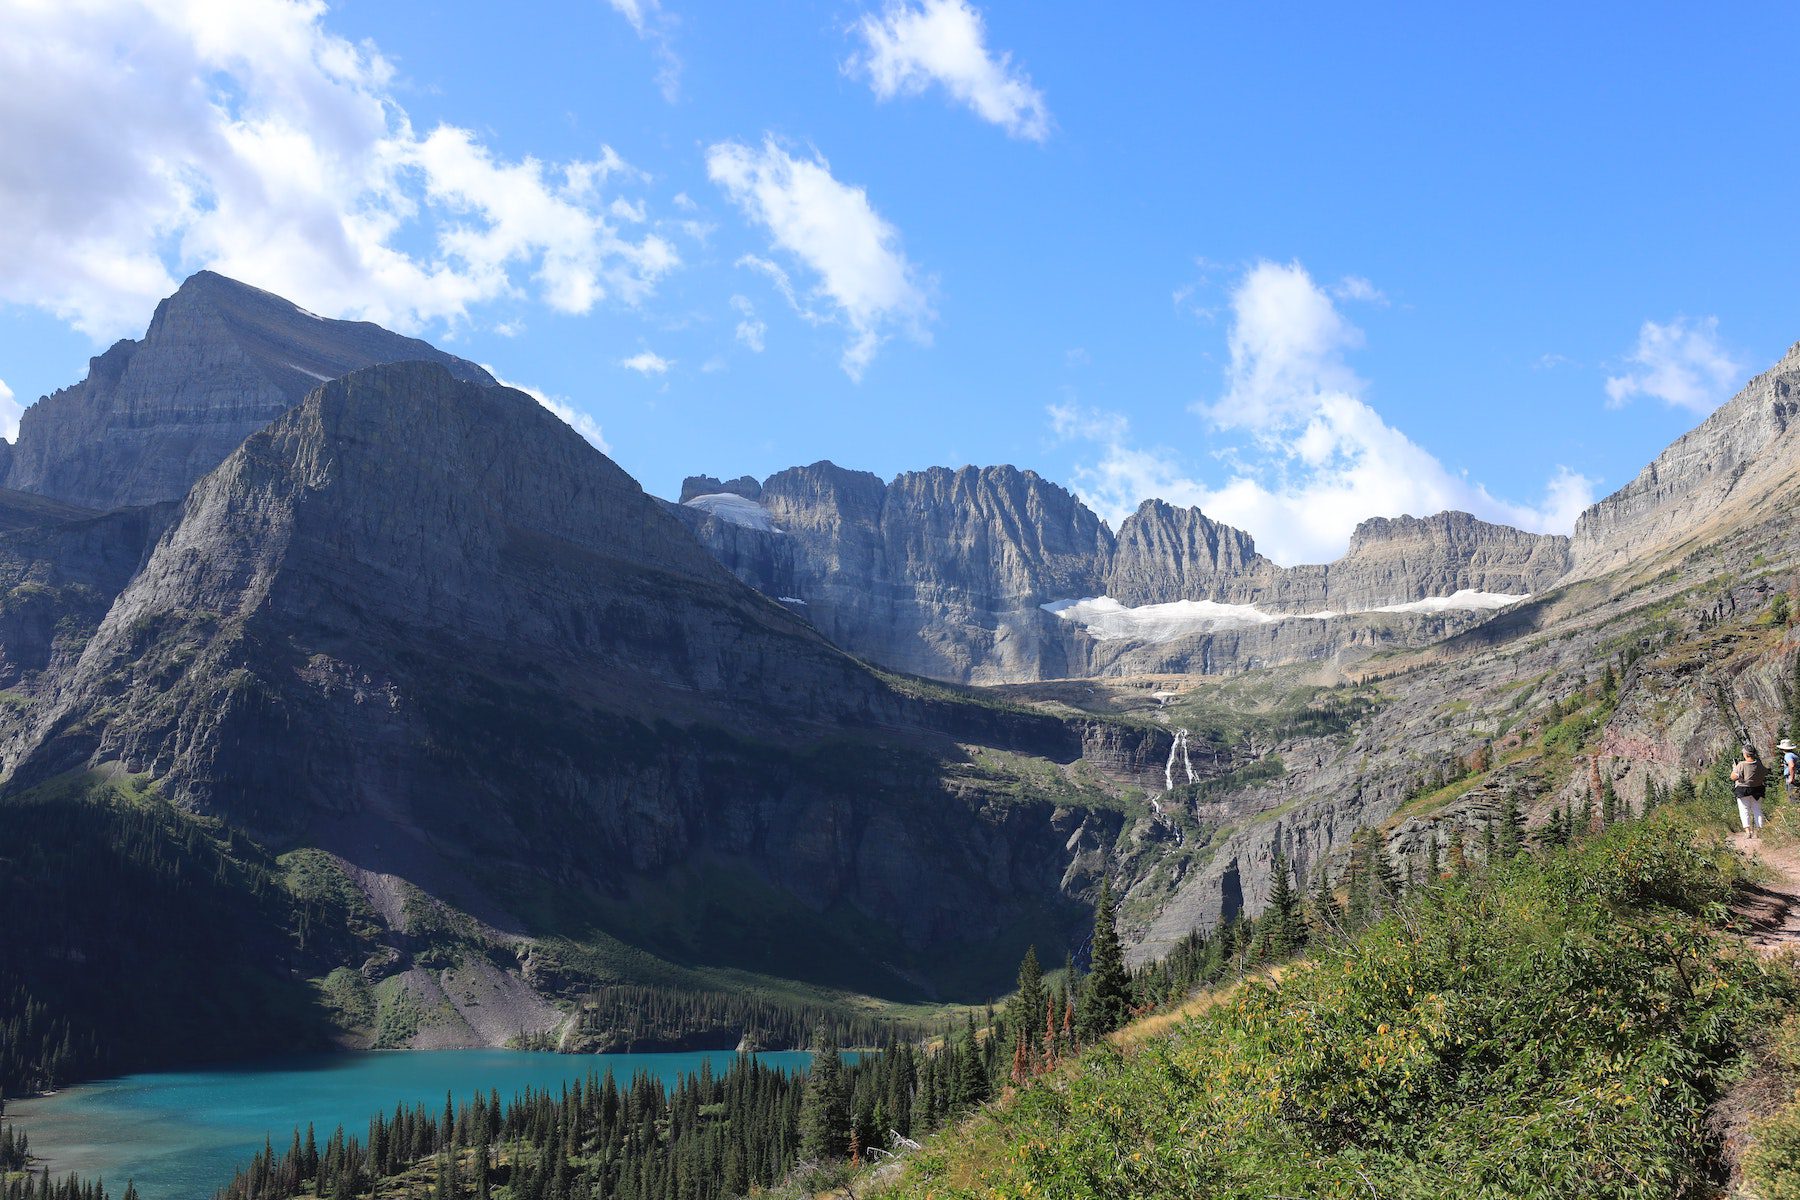 Grinnell Lake at Glacier National Park depicting a tree-lined hill with soaring mountains behind the lake